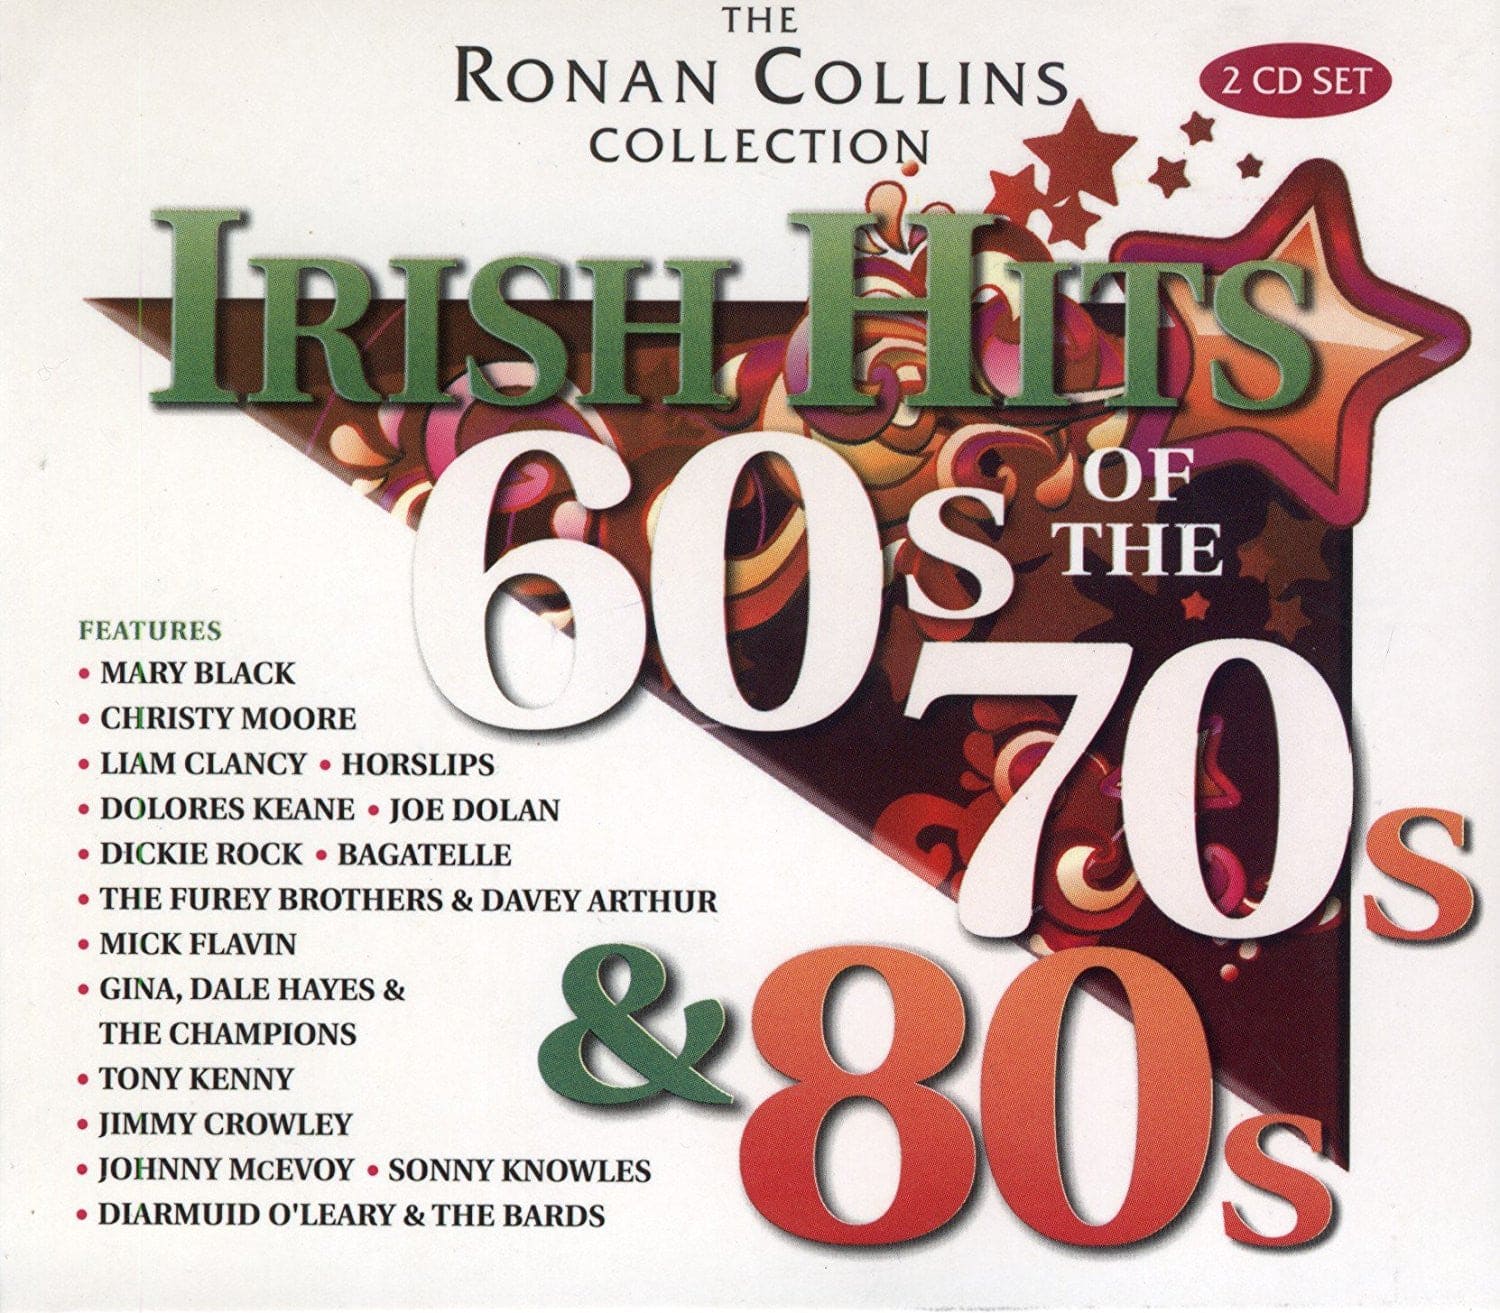 HITS OF THE 60’S, 70’S & 80’S - The Ronan Collins Collection - Various Artists [CD]